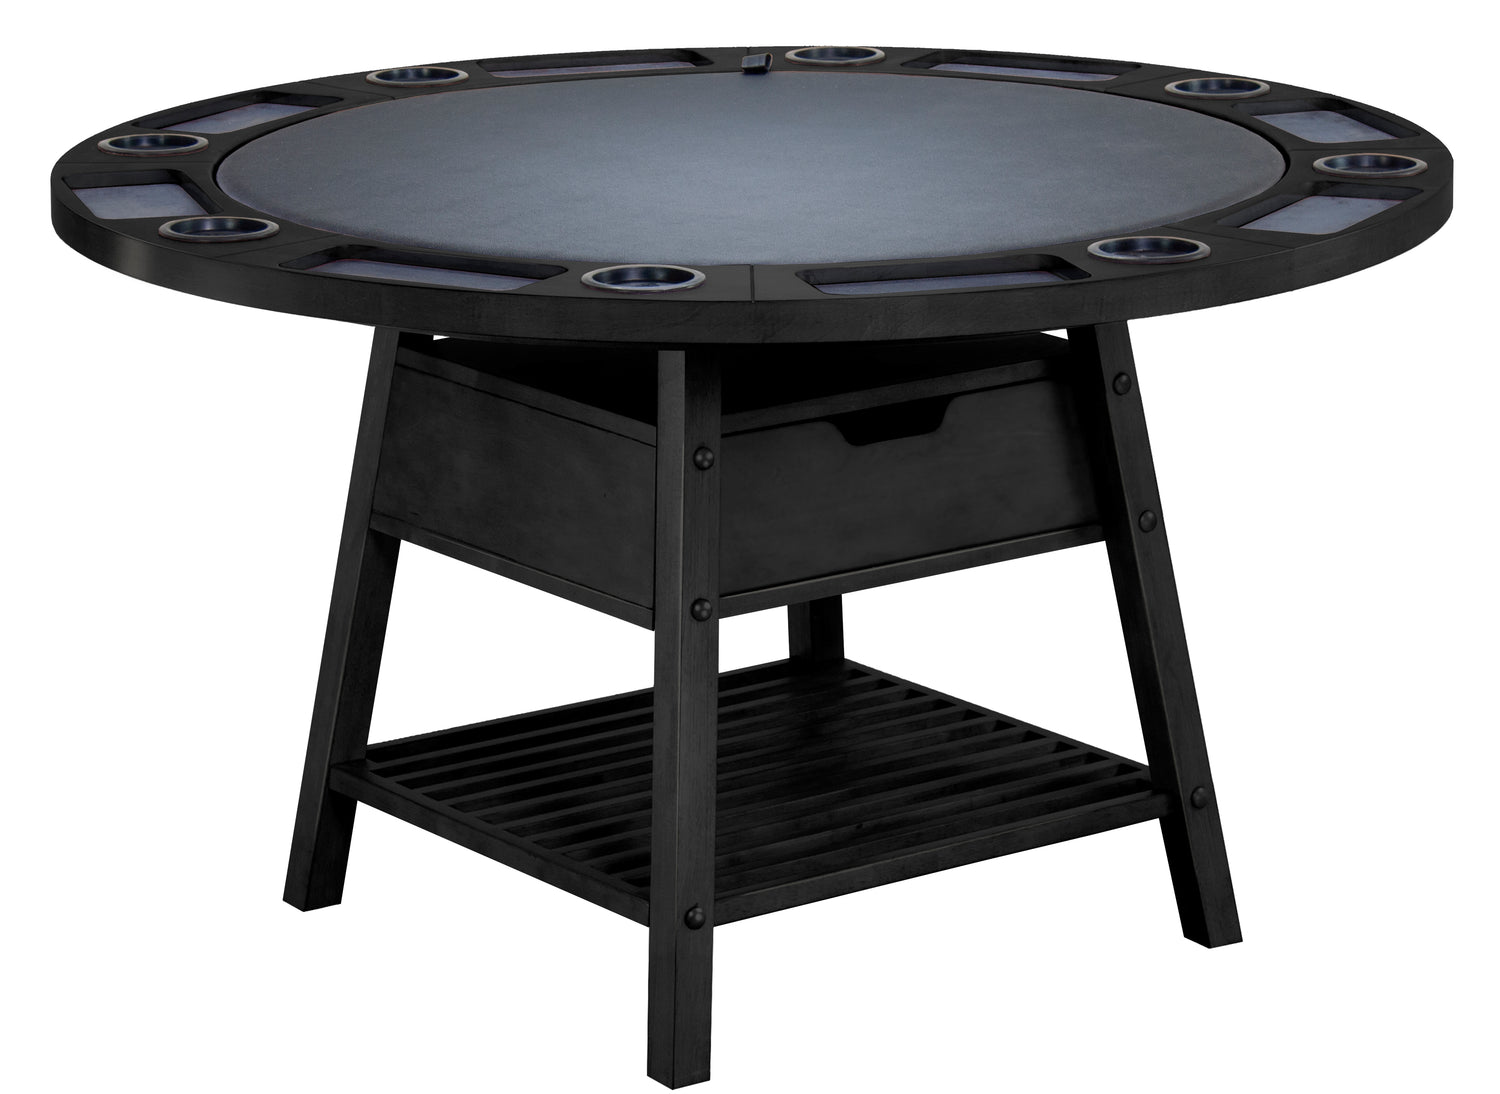 Legacy Billiards Emory 2 in 1 Game Table in Graphite Finish